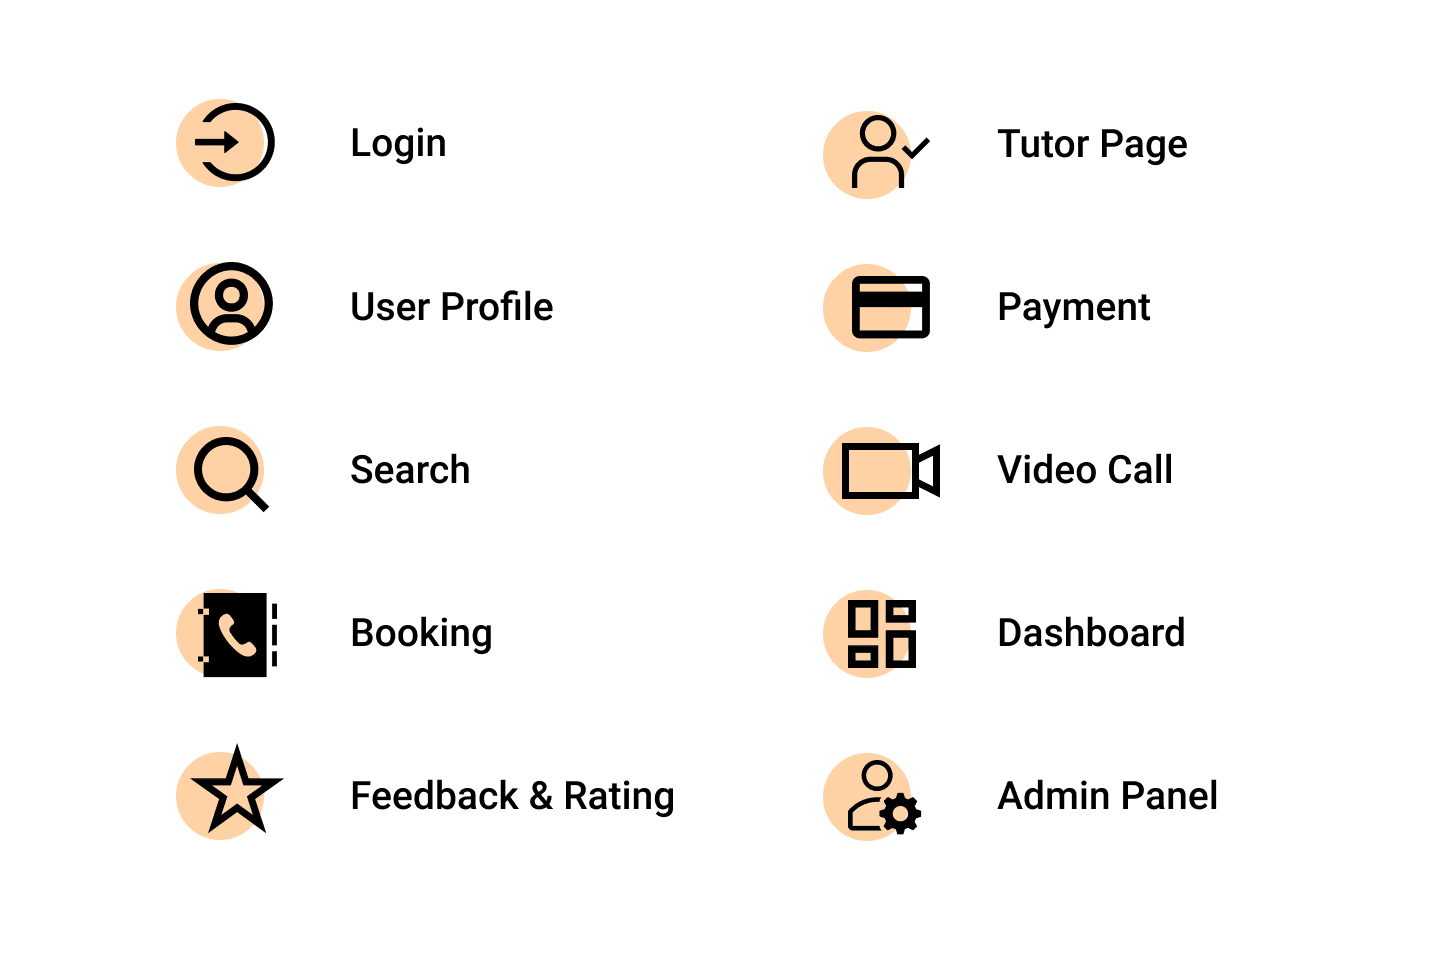 Features of the eLearning Platform